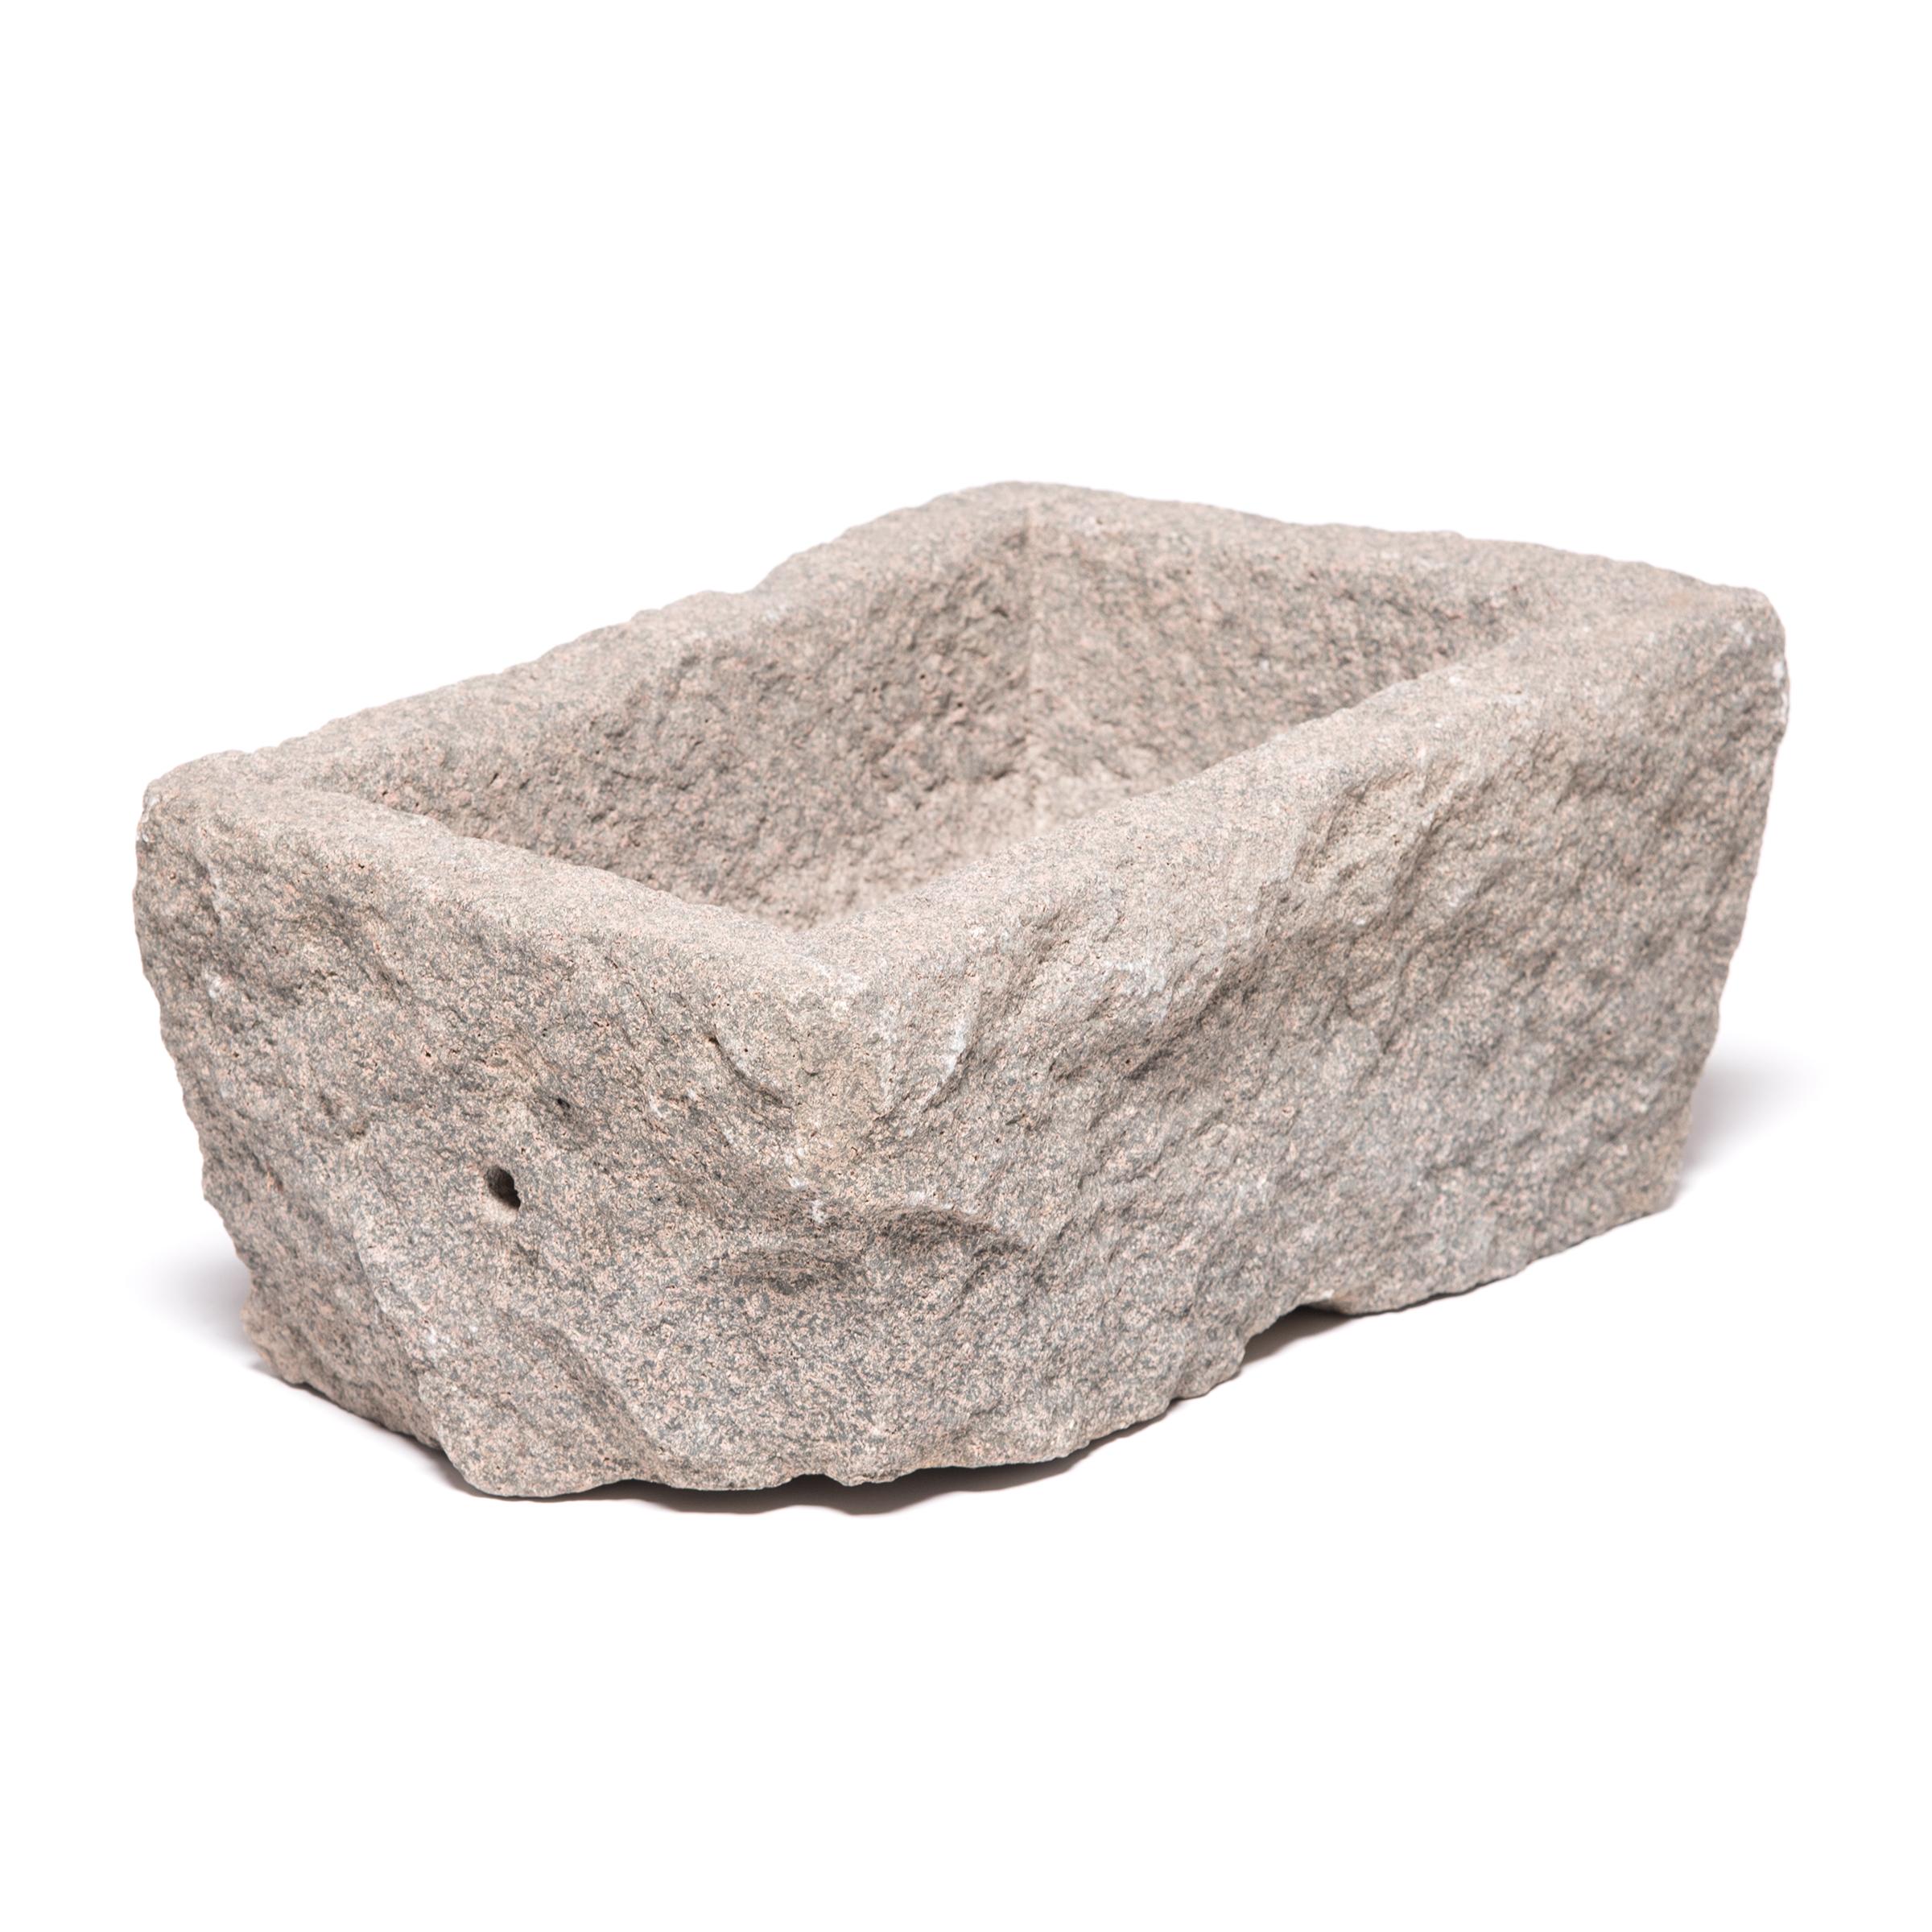 Once a common sight in courtyards throughout rural China, this textured stone trough was filled with grain for chickens and other barnyard fowl. Chiseled from a block of stone over a century ago, this trough has a uniquely sculptural form, with an